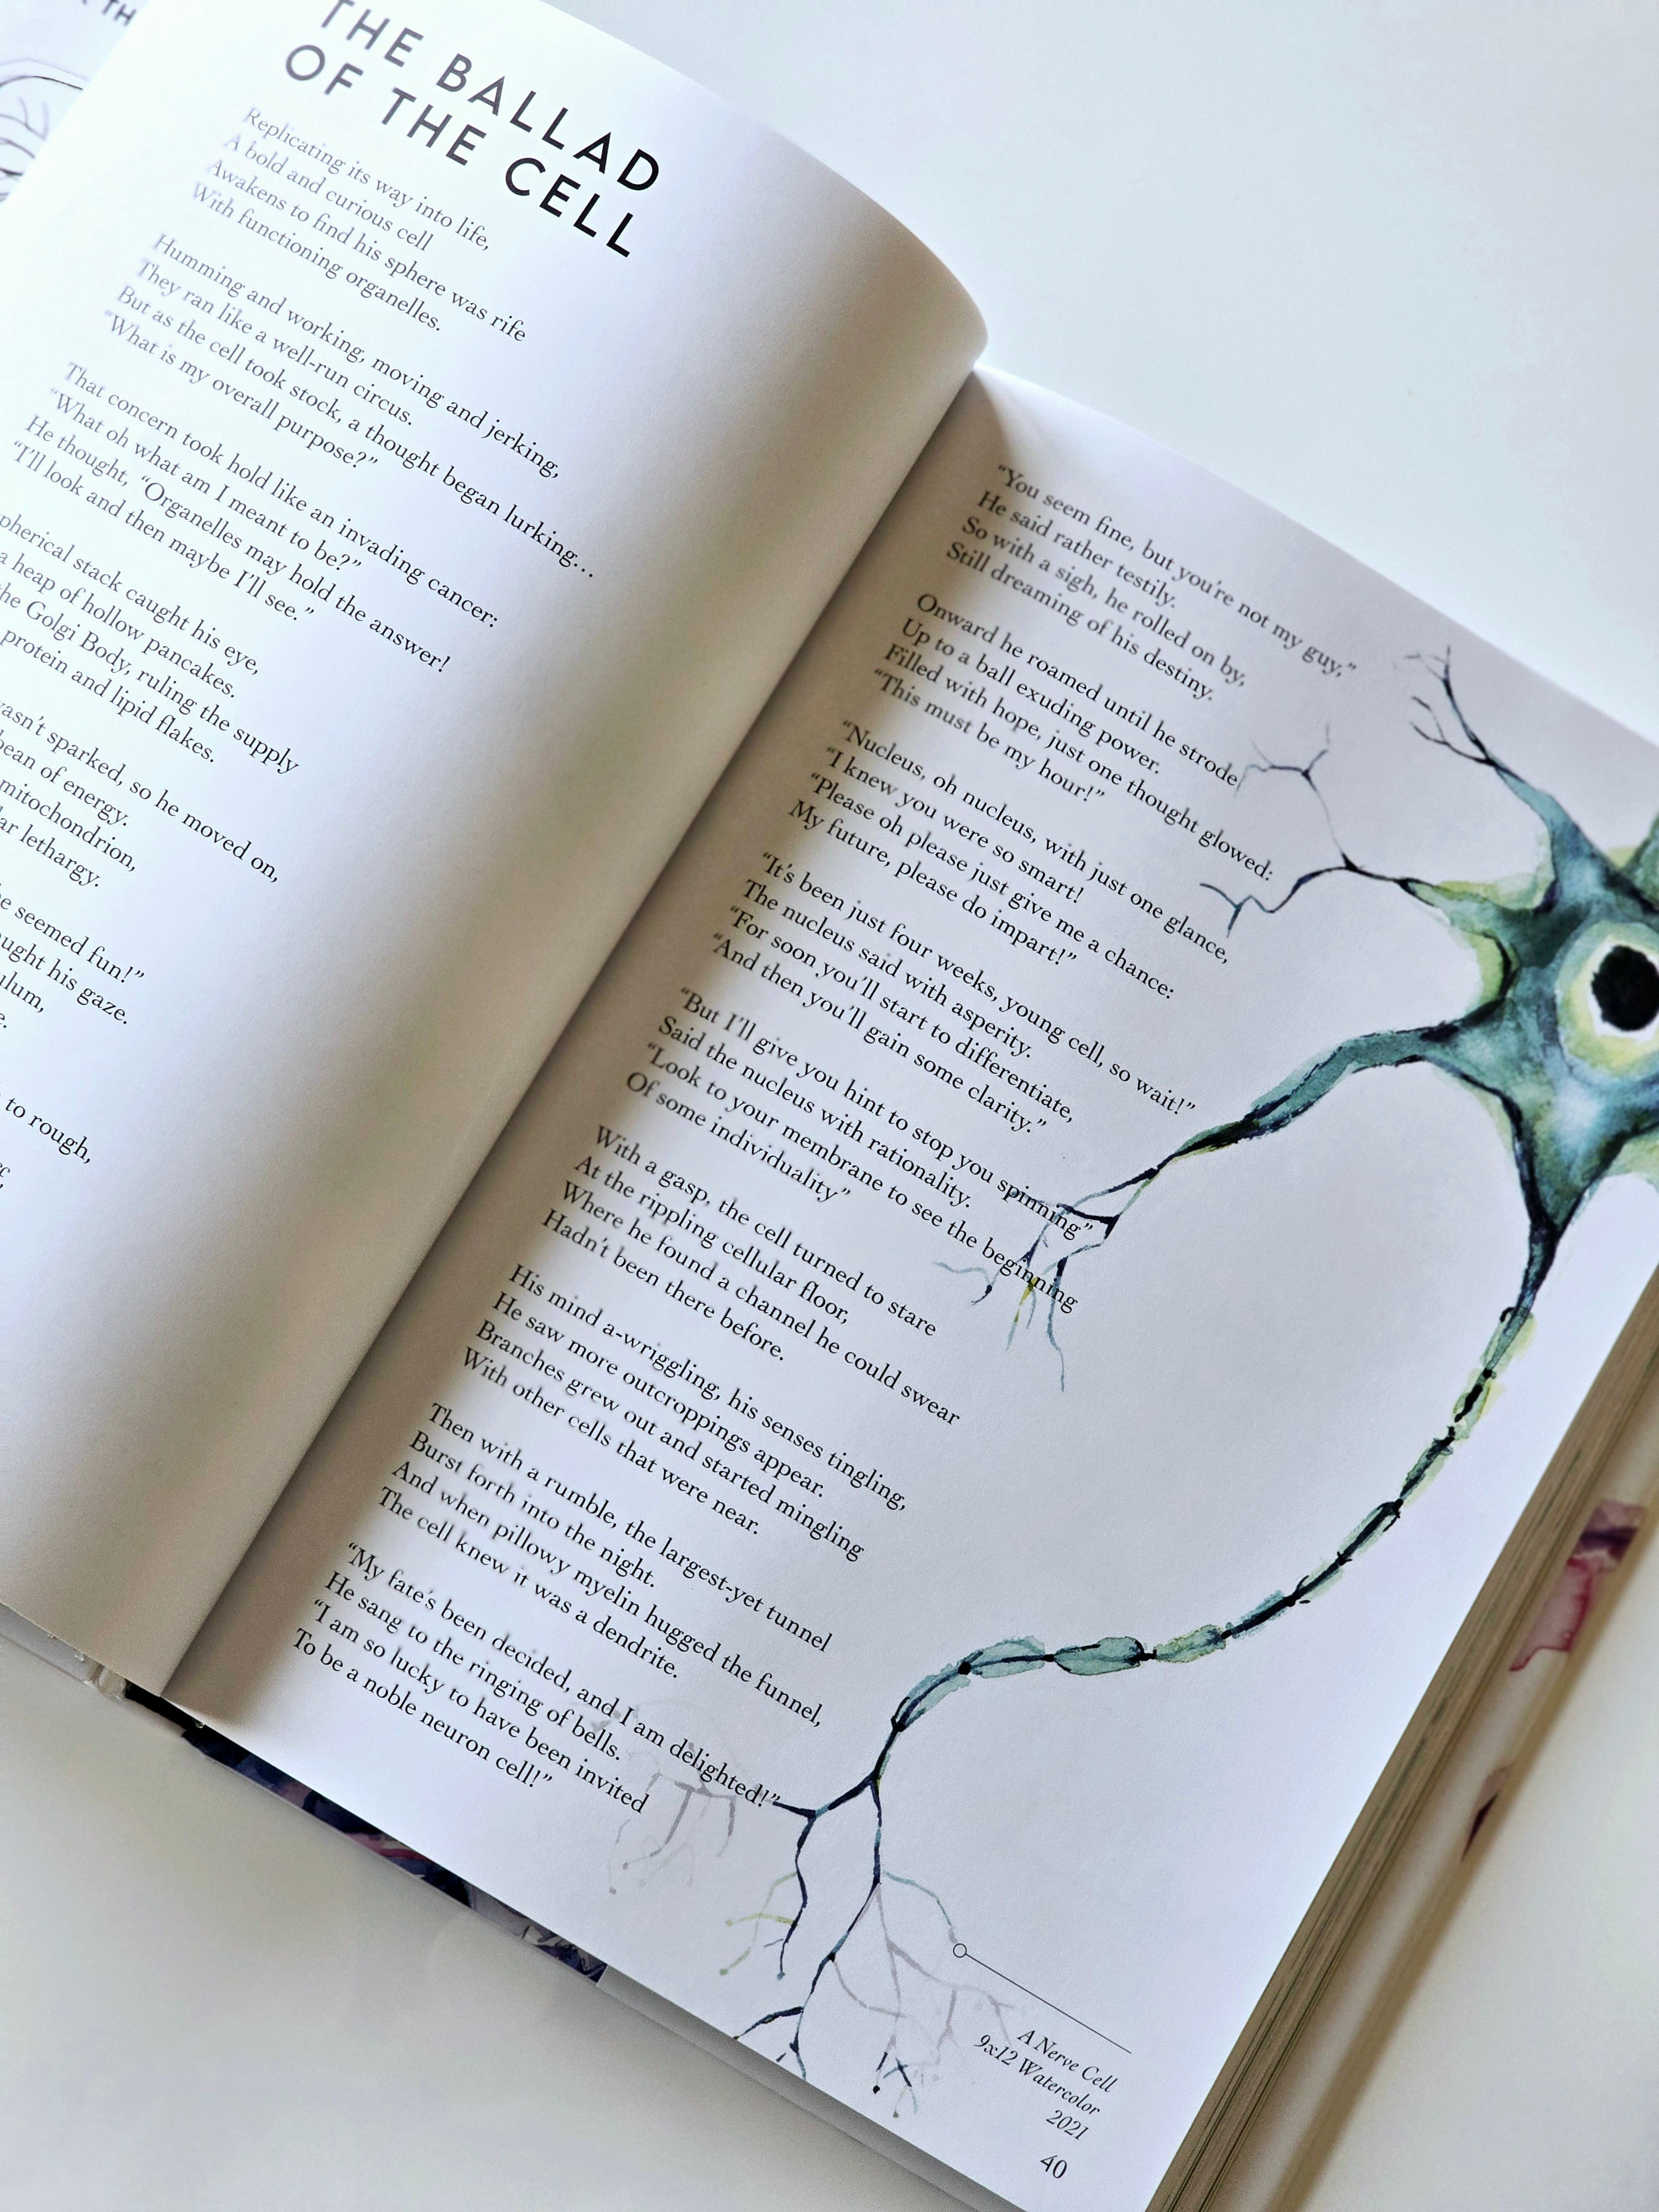 Anatomy is Beautiful: A Collection of Anatomical Art & Poetry